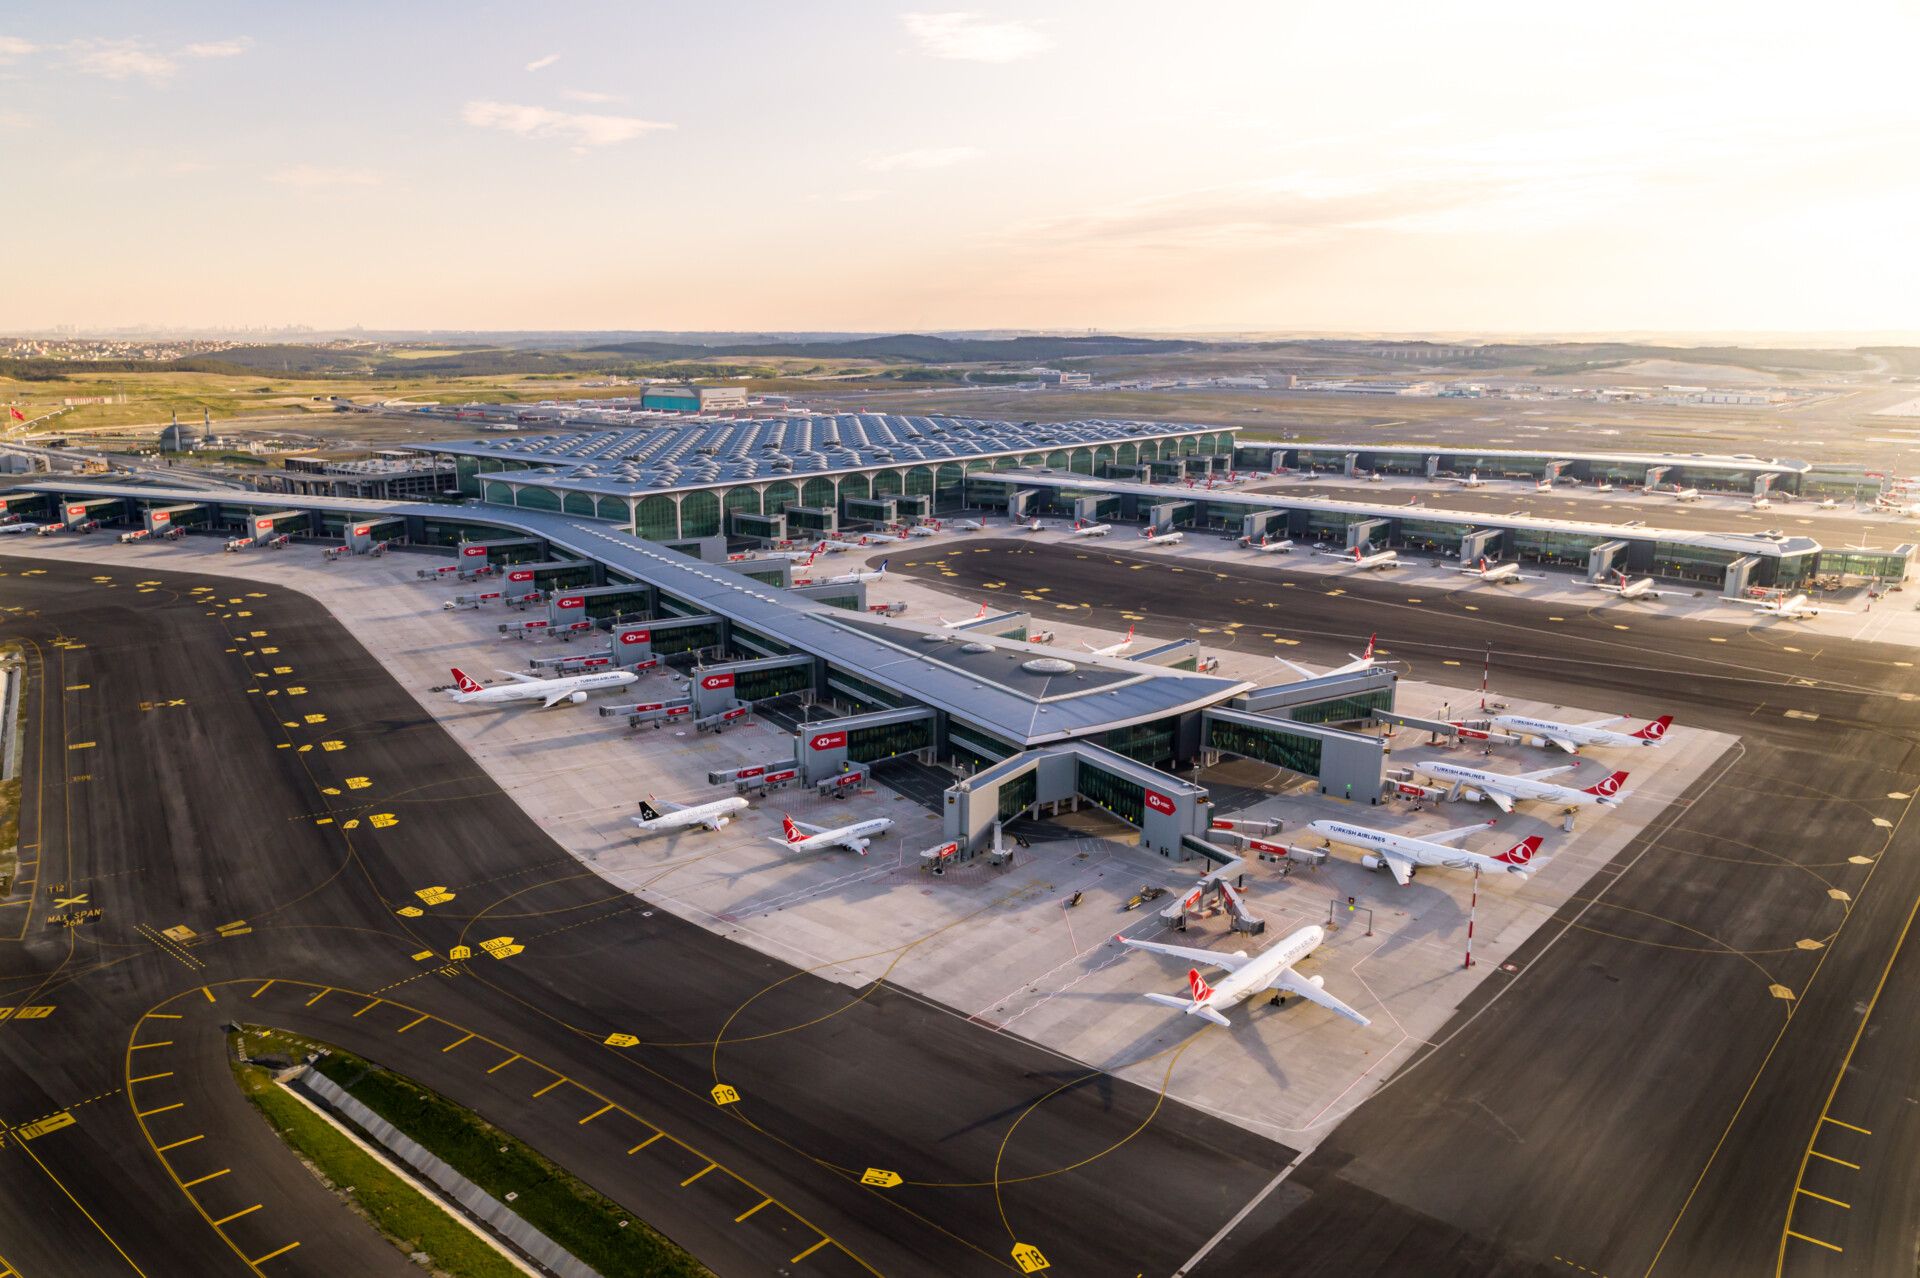 Istanbul Airport, Condé Nast, World's Best Airport